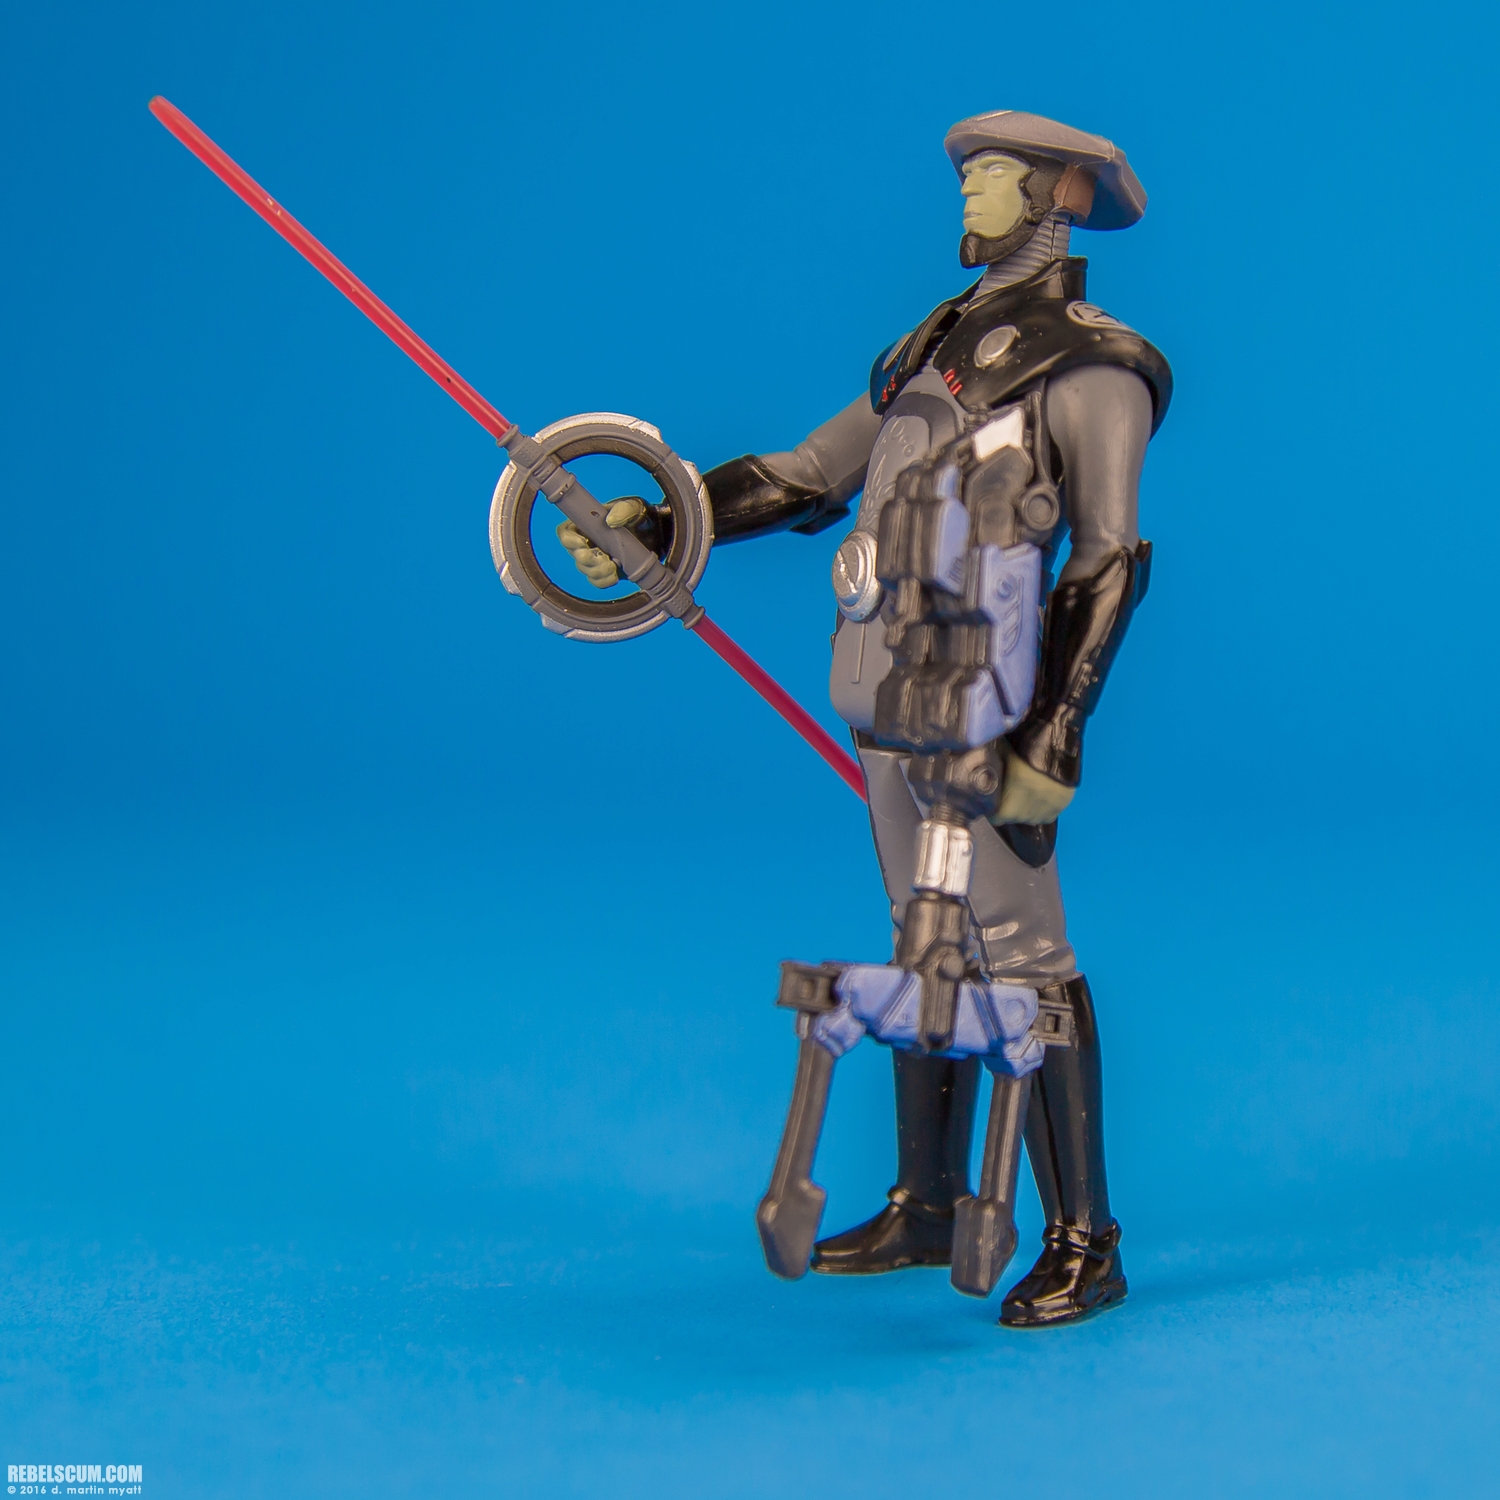 Fifth-Brother-Imperial-Inquisitor-The-Force-Awakens-Hasbro-007.jpg